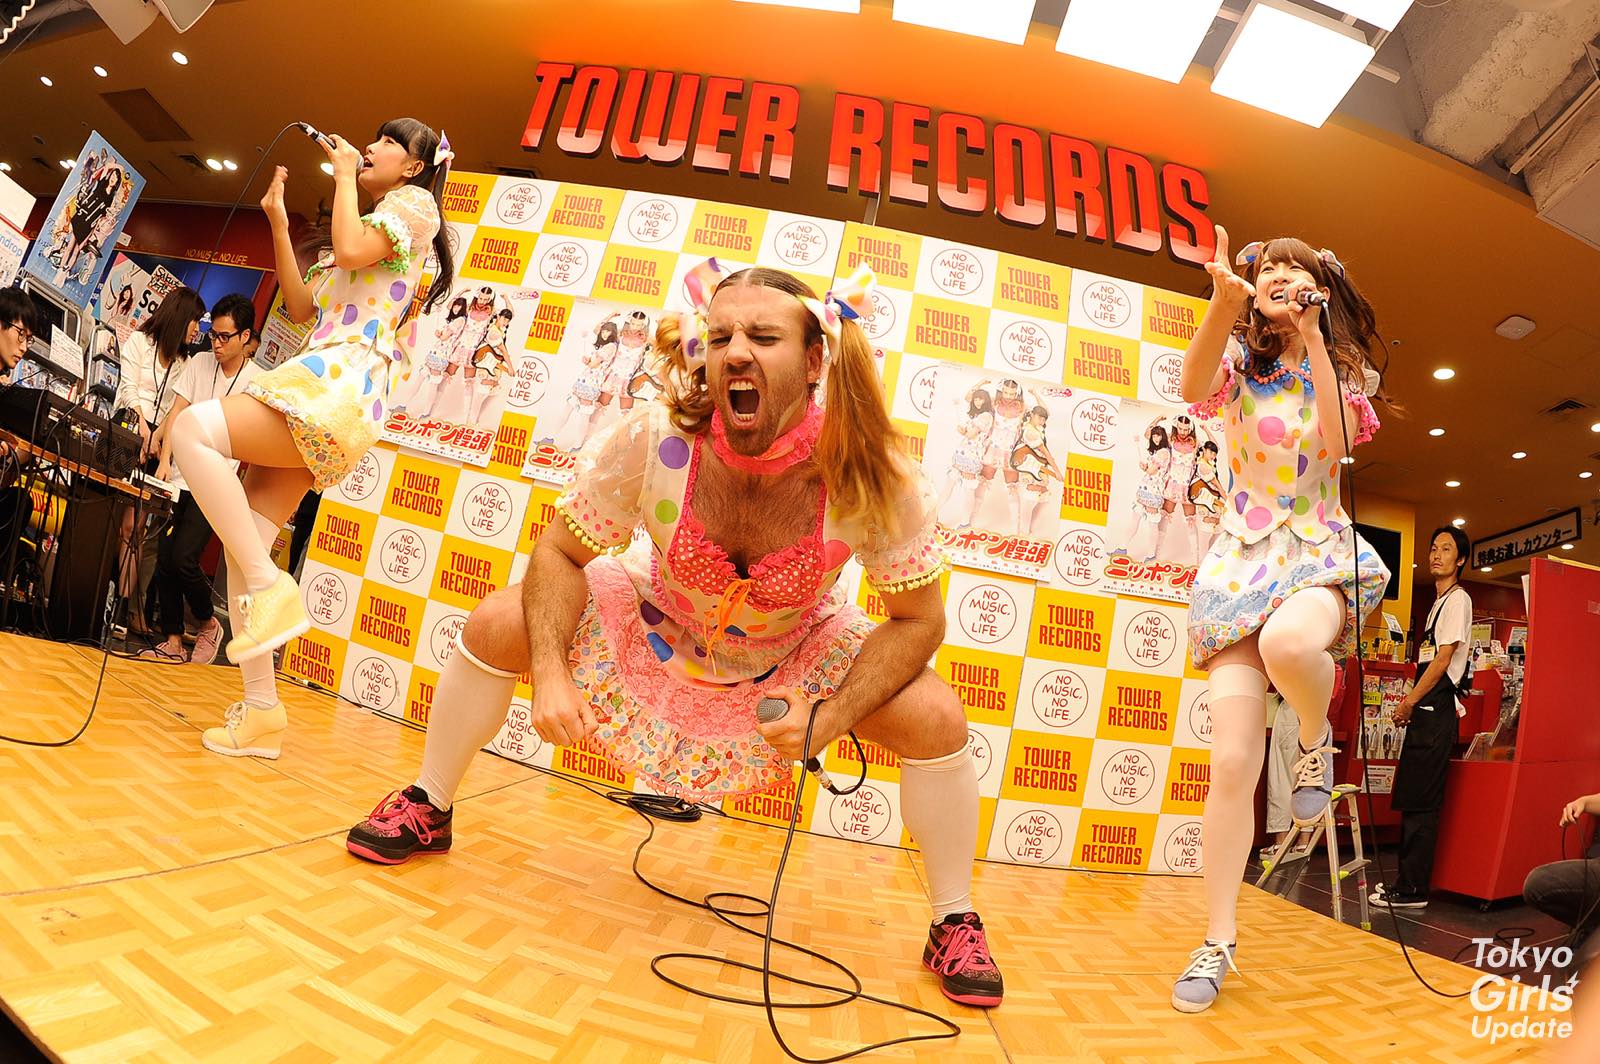 LADY BABY Whips Up a Frenzy at Tower Records in Shibuya During Release Event!